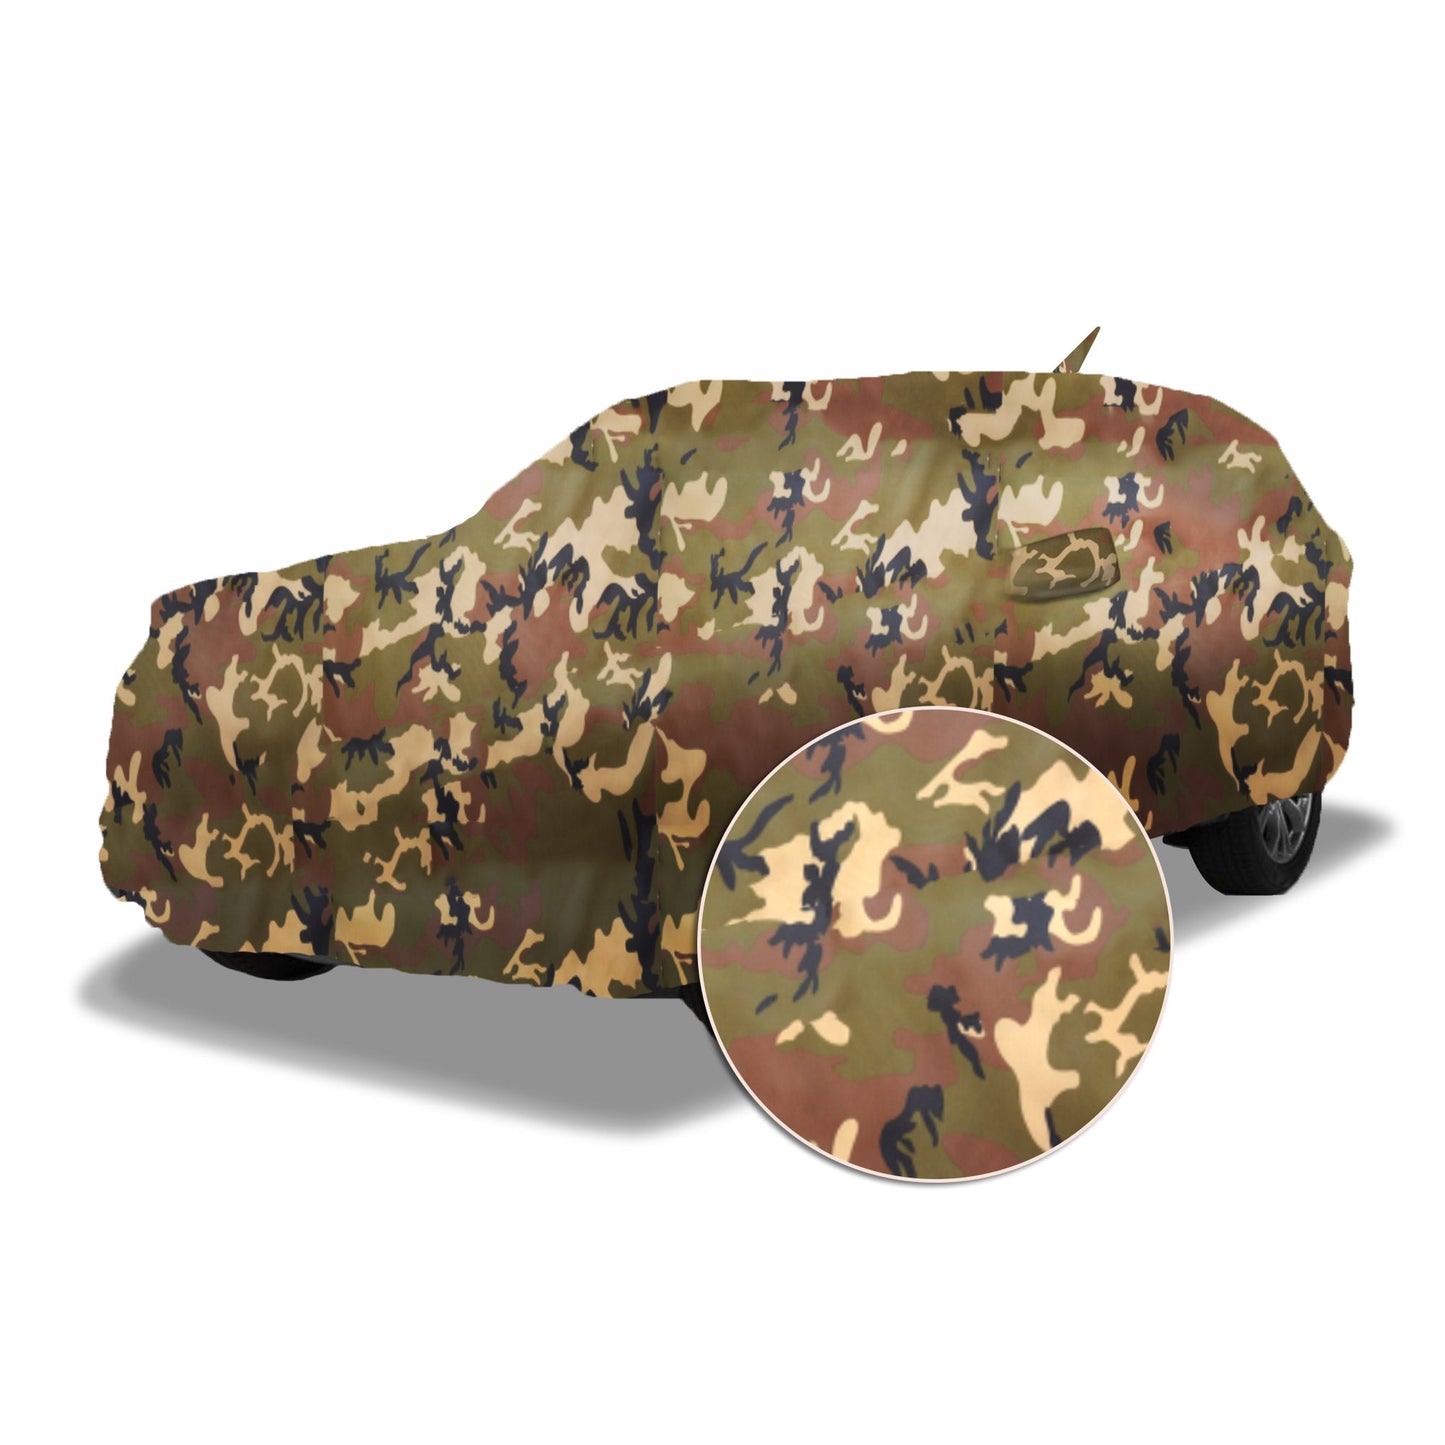 Ascot Kia Carens Car Body Cover Extra Strong & Dust Proof Jungle Military Car Cover with UV Proof & Water-Resistant Coating